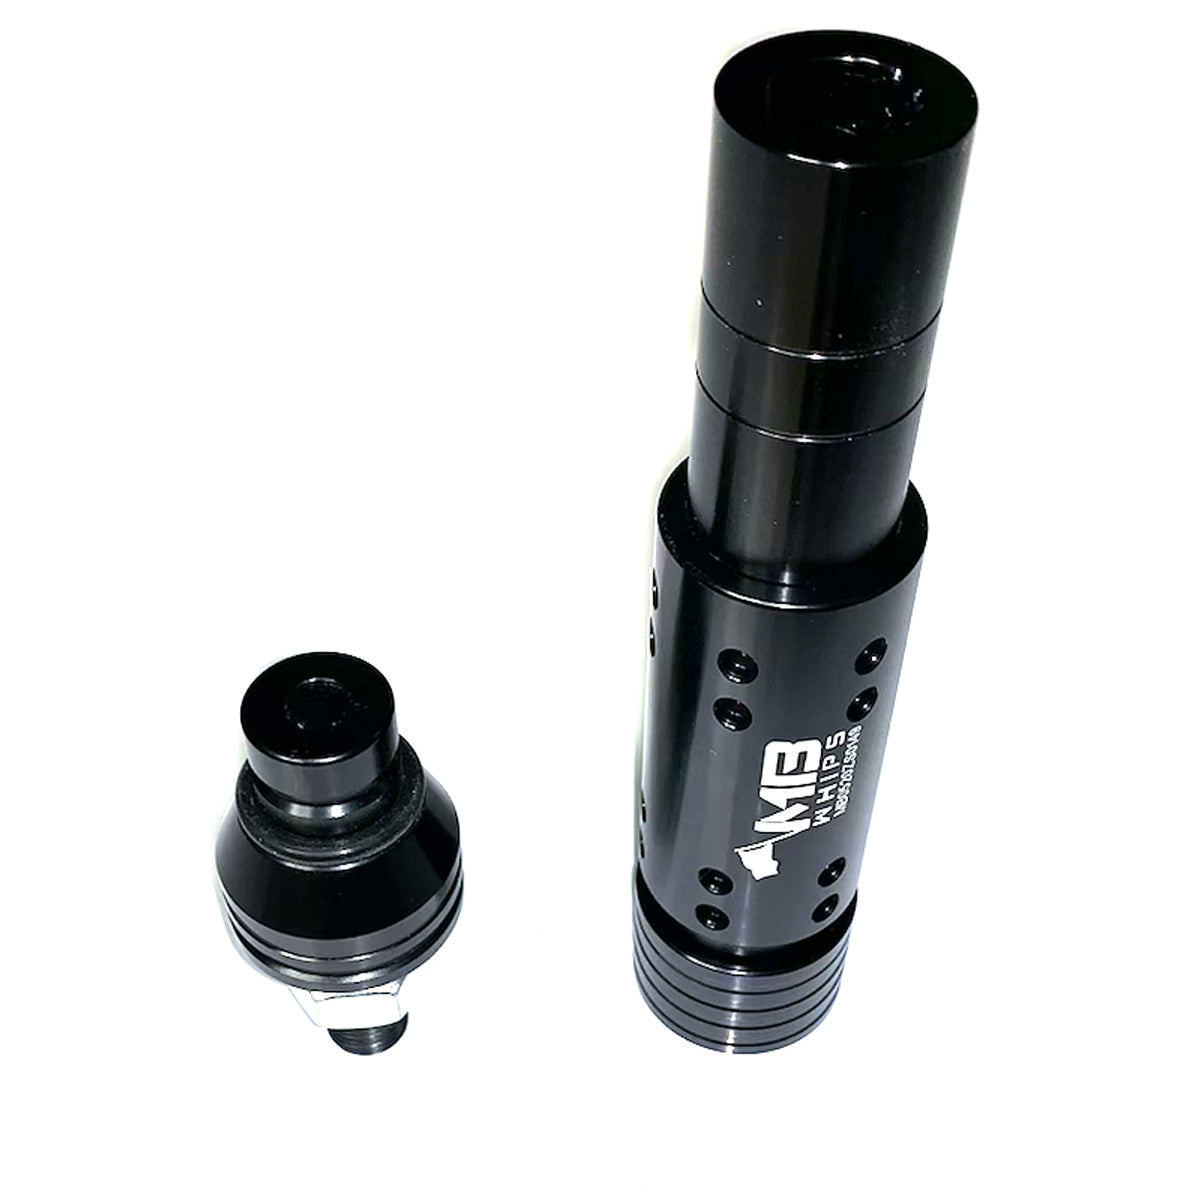 A 1/2” UTV Flag Pole Base with Quick Release from MB Whips. The image shows a sleek, black, cylindrical base with the MB Whips logo engraved and multiple bolt holes, alongside a smaller black quick-release attachment designed to fit securely with the base. The durable design and attachment mechanism are clearly visible, highlighting the product's quality and functionality.